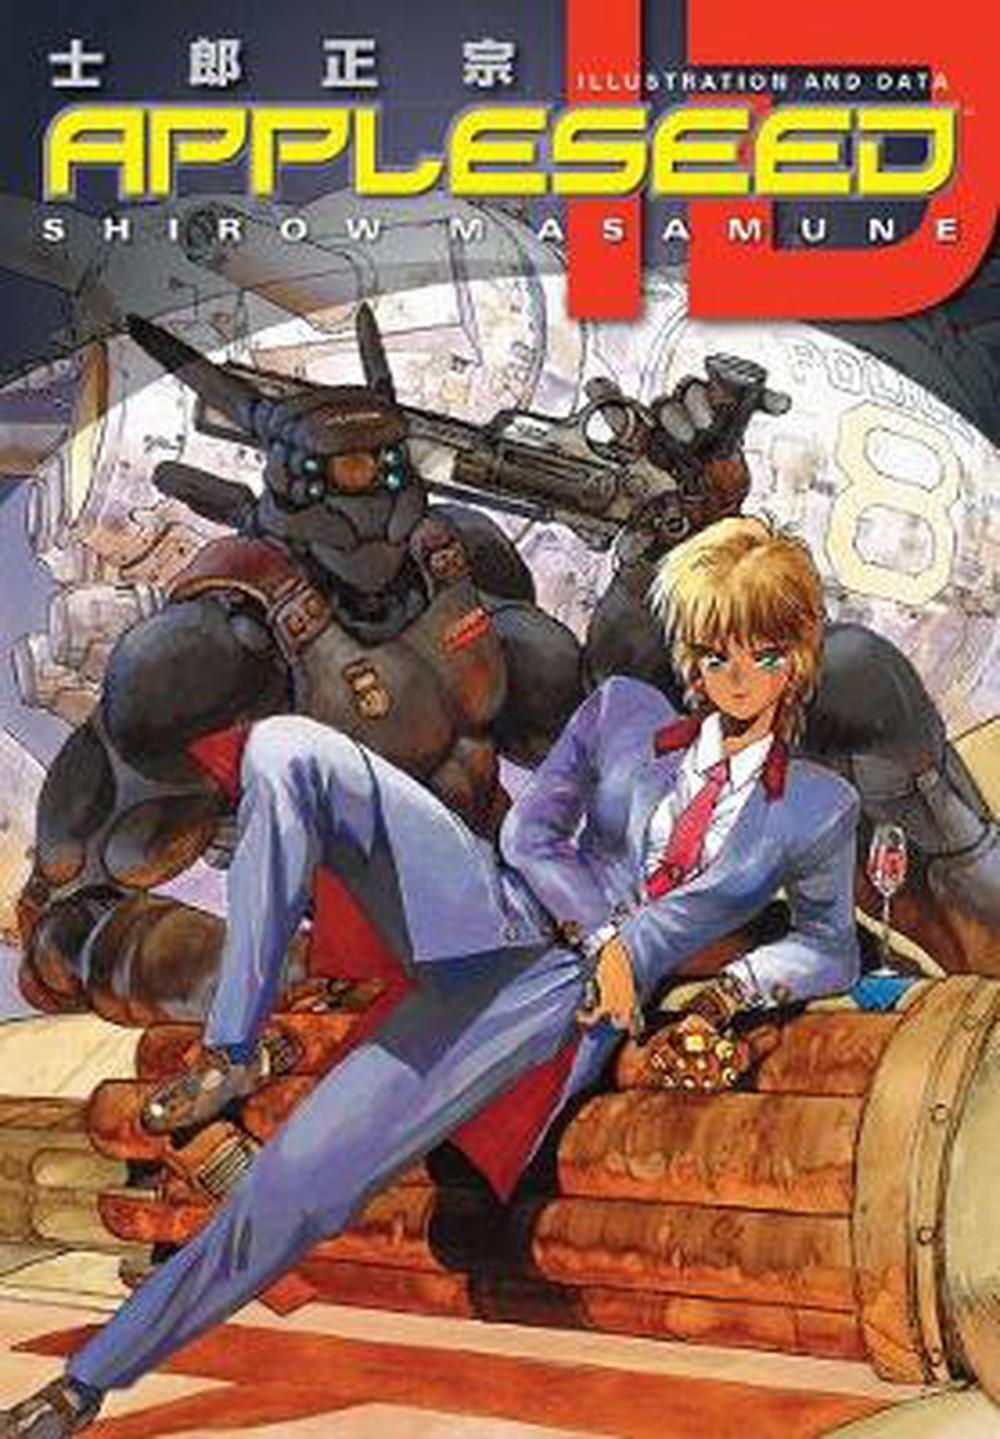 Appleseed, Vol. 1 by Masamune Shirow